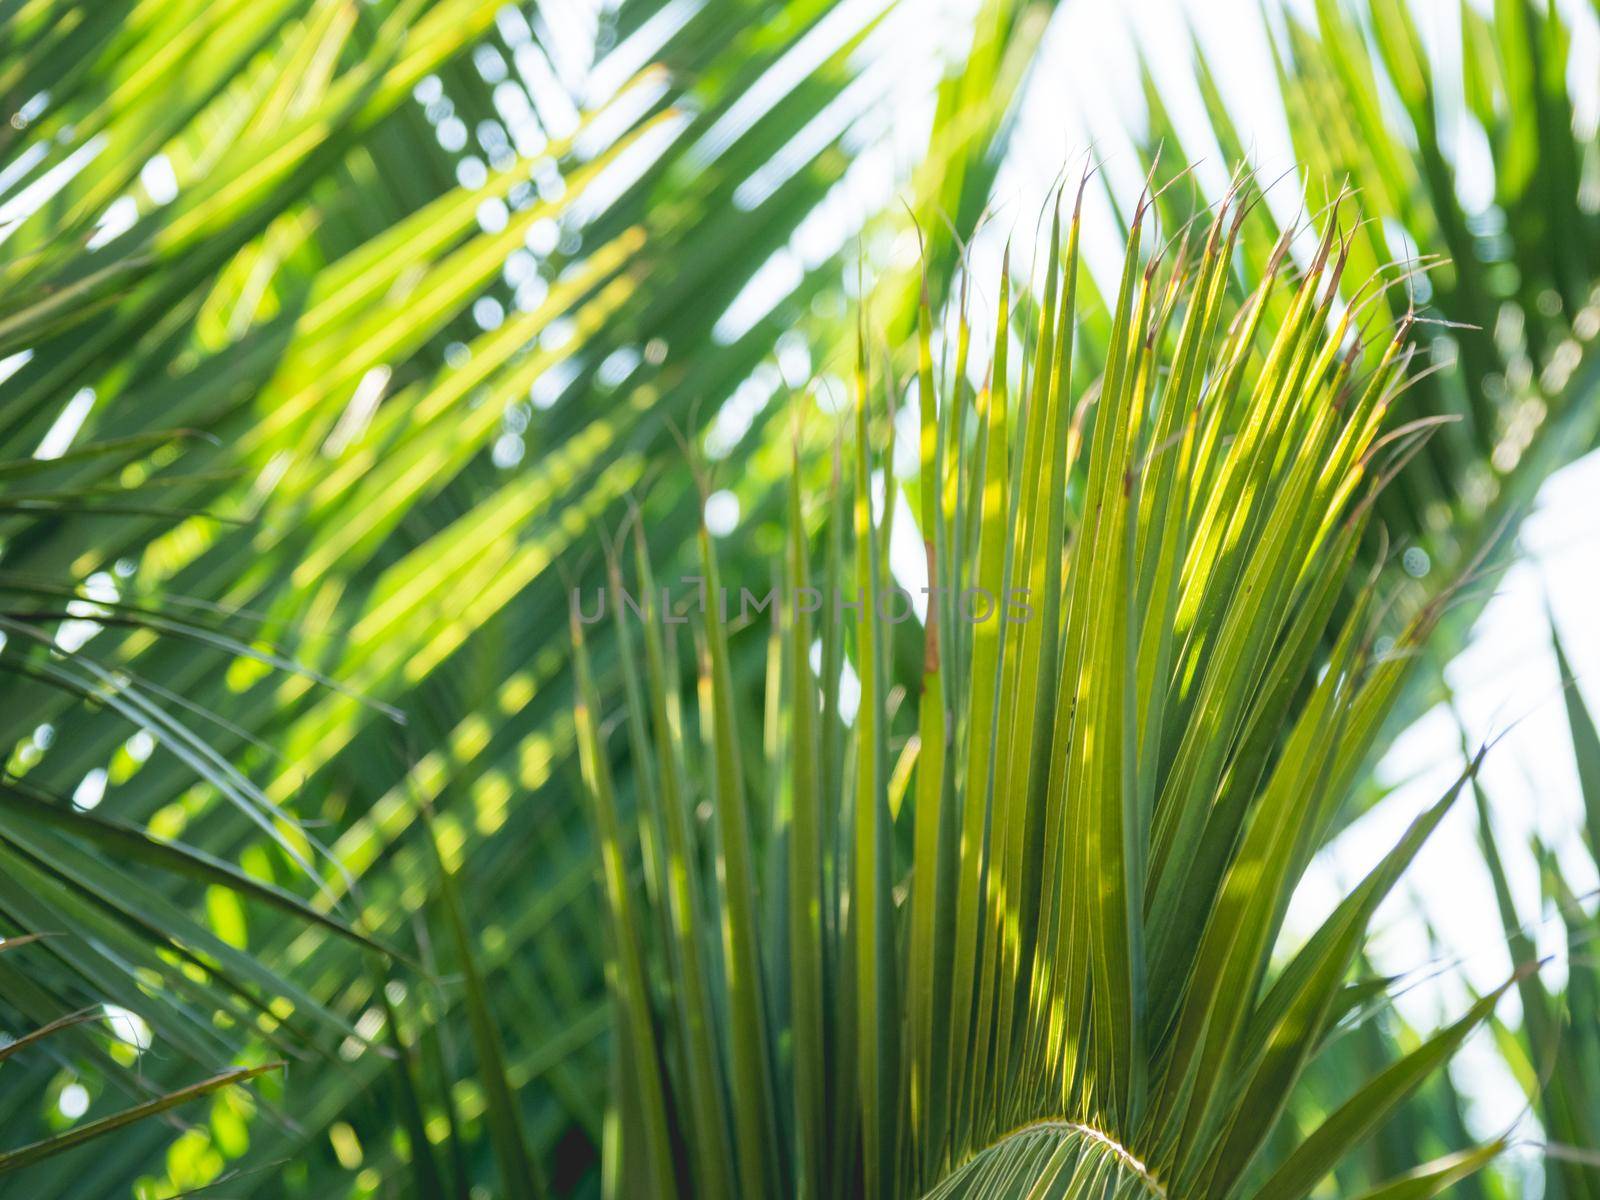 Sun shines on palm tree leaves. Tropical tree with fresh green foliage.